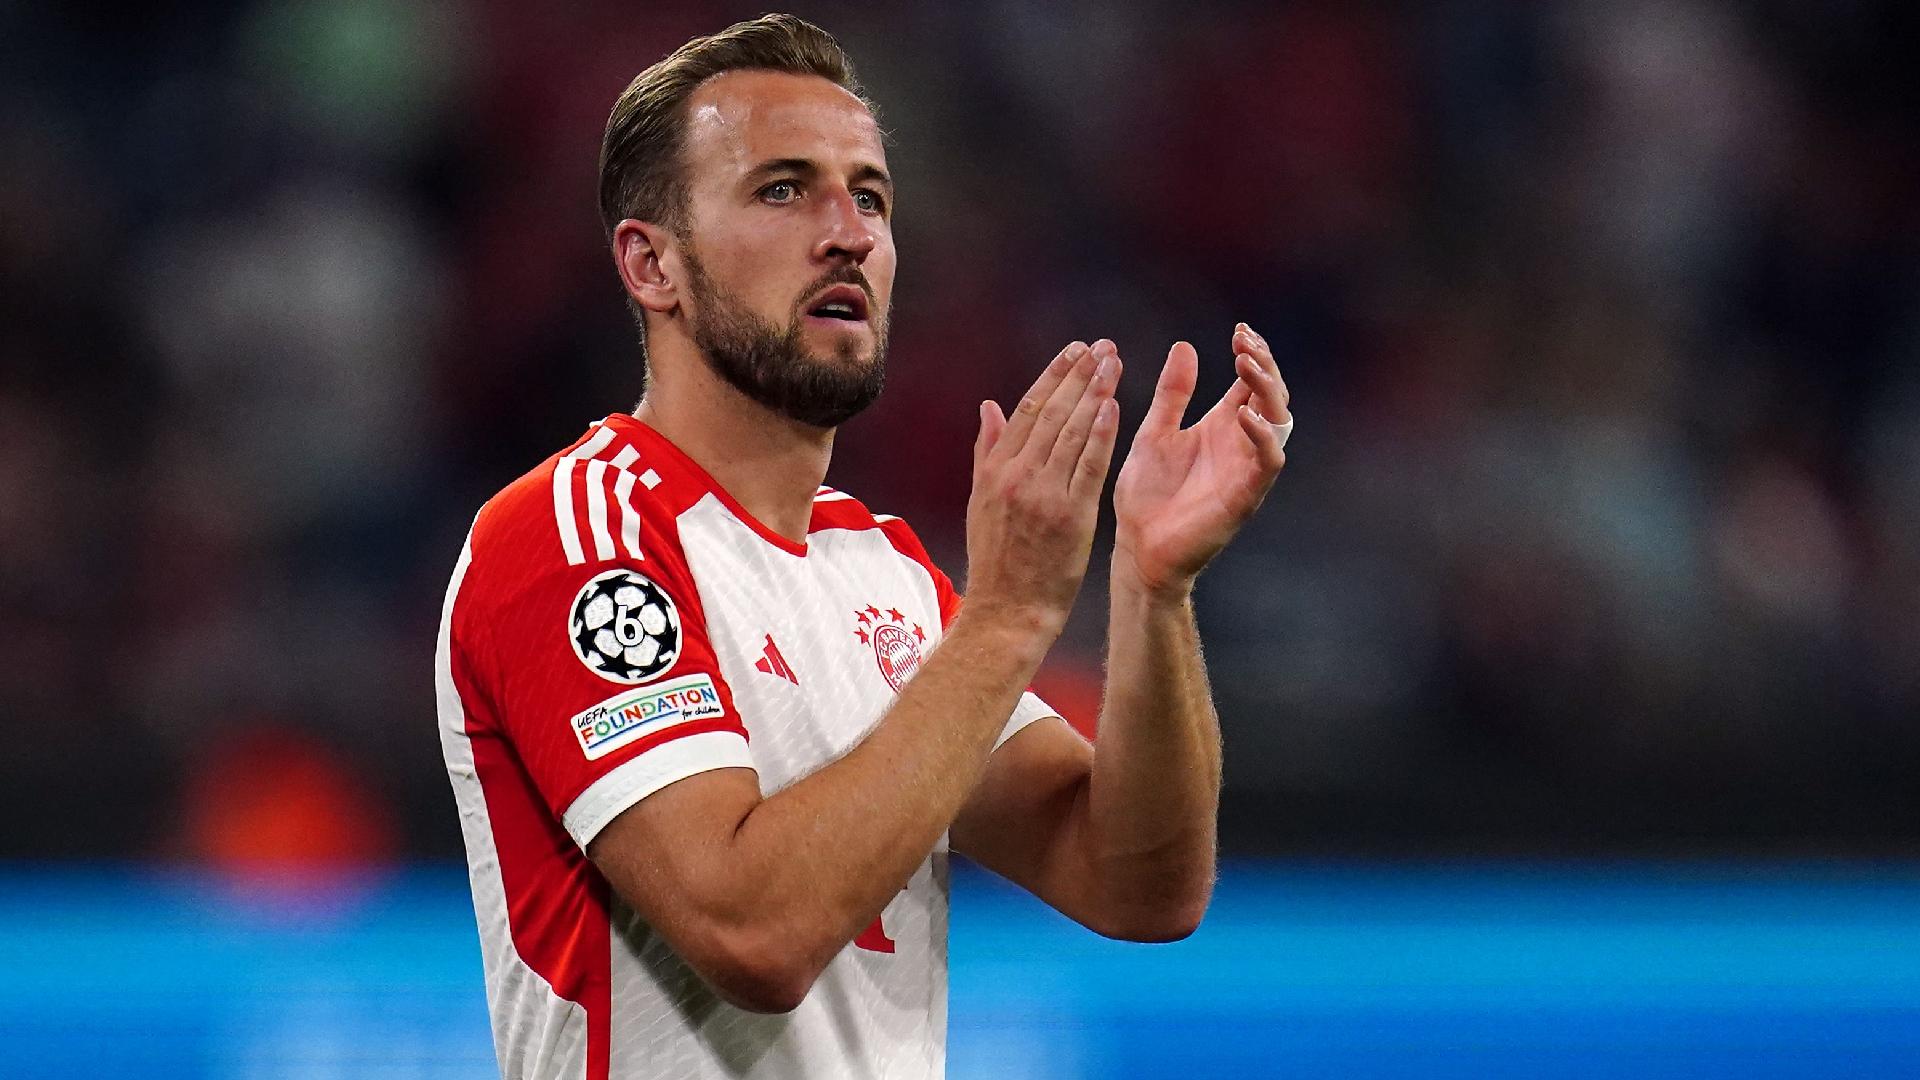 Harry Kane resumes training with Bayern after injury that led to England absence